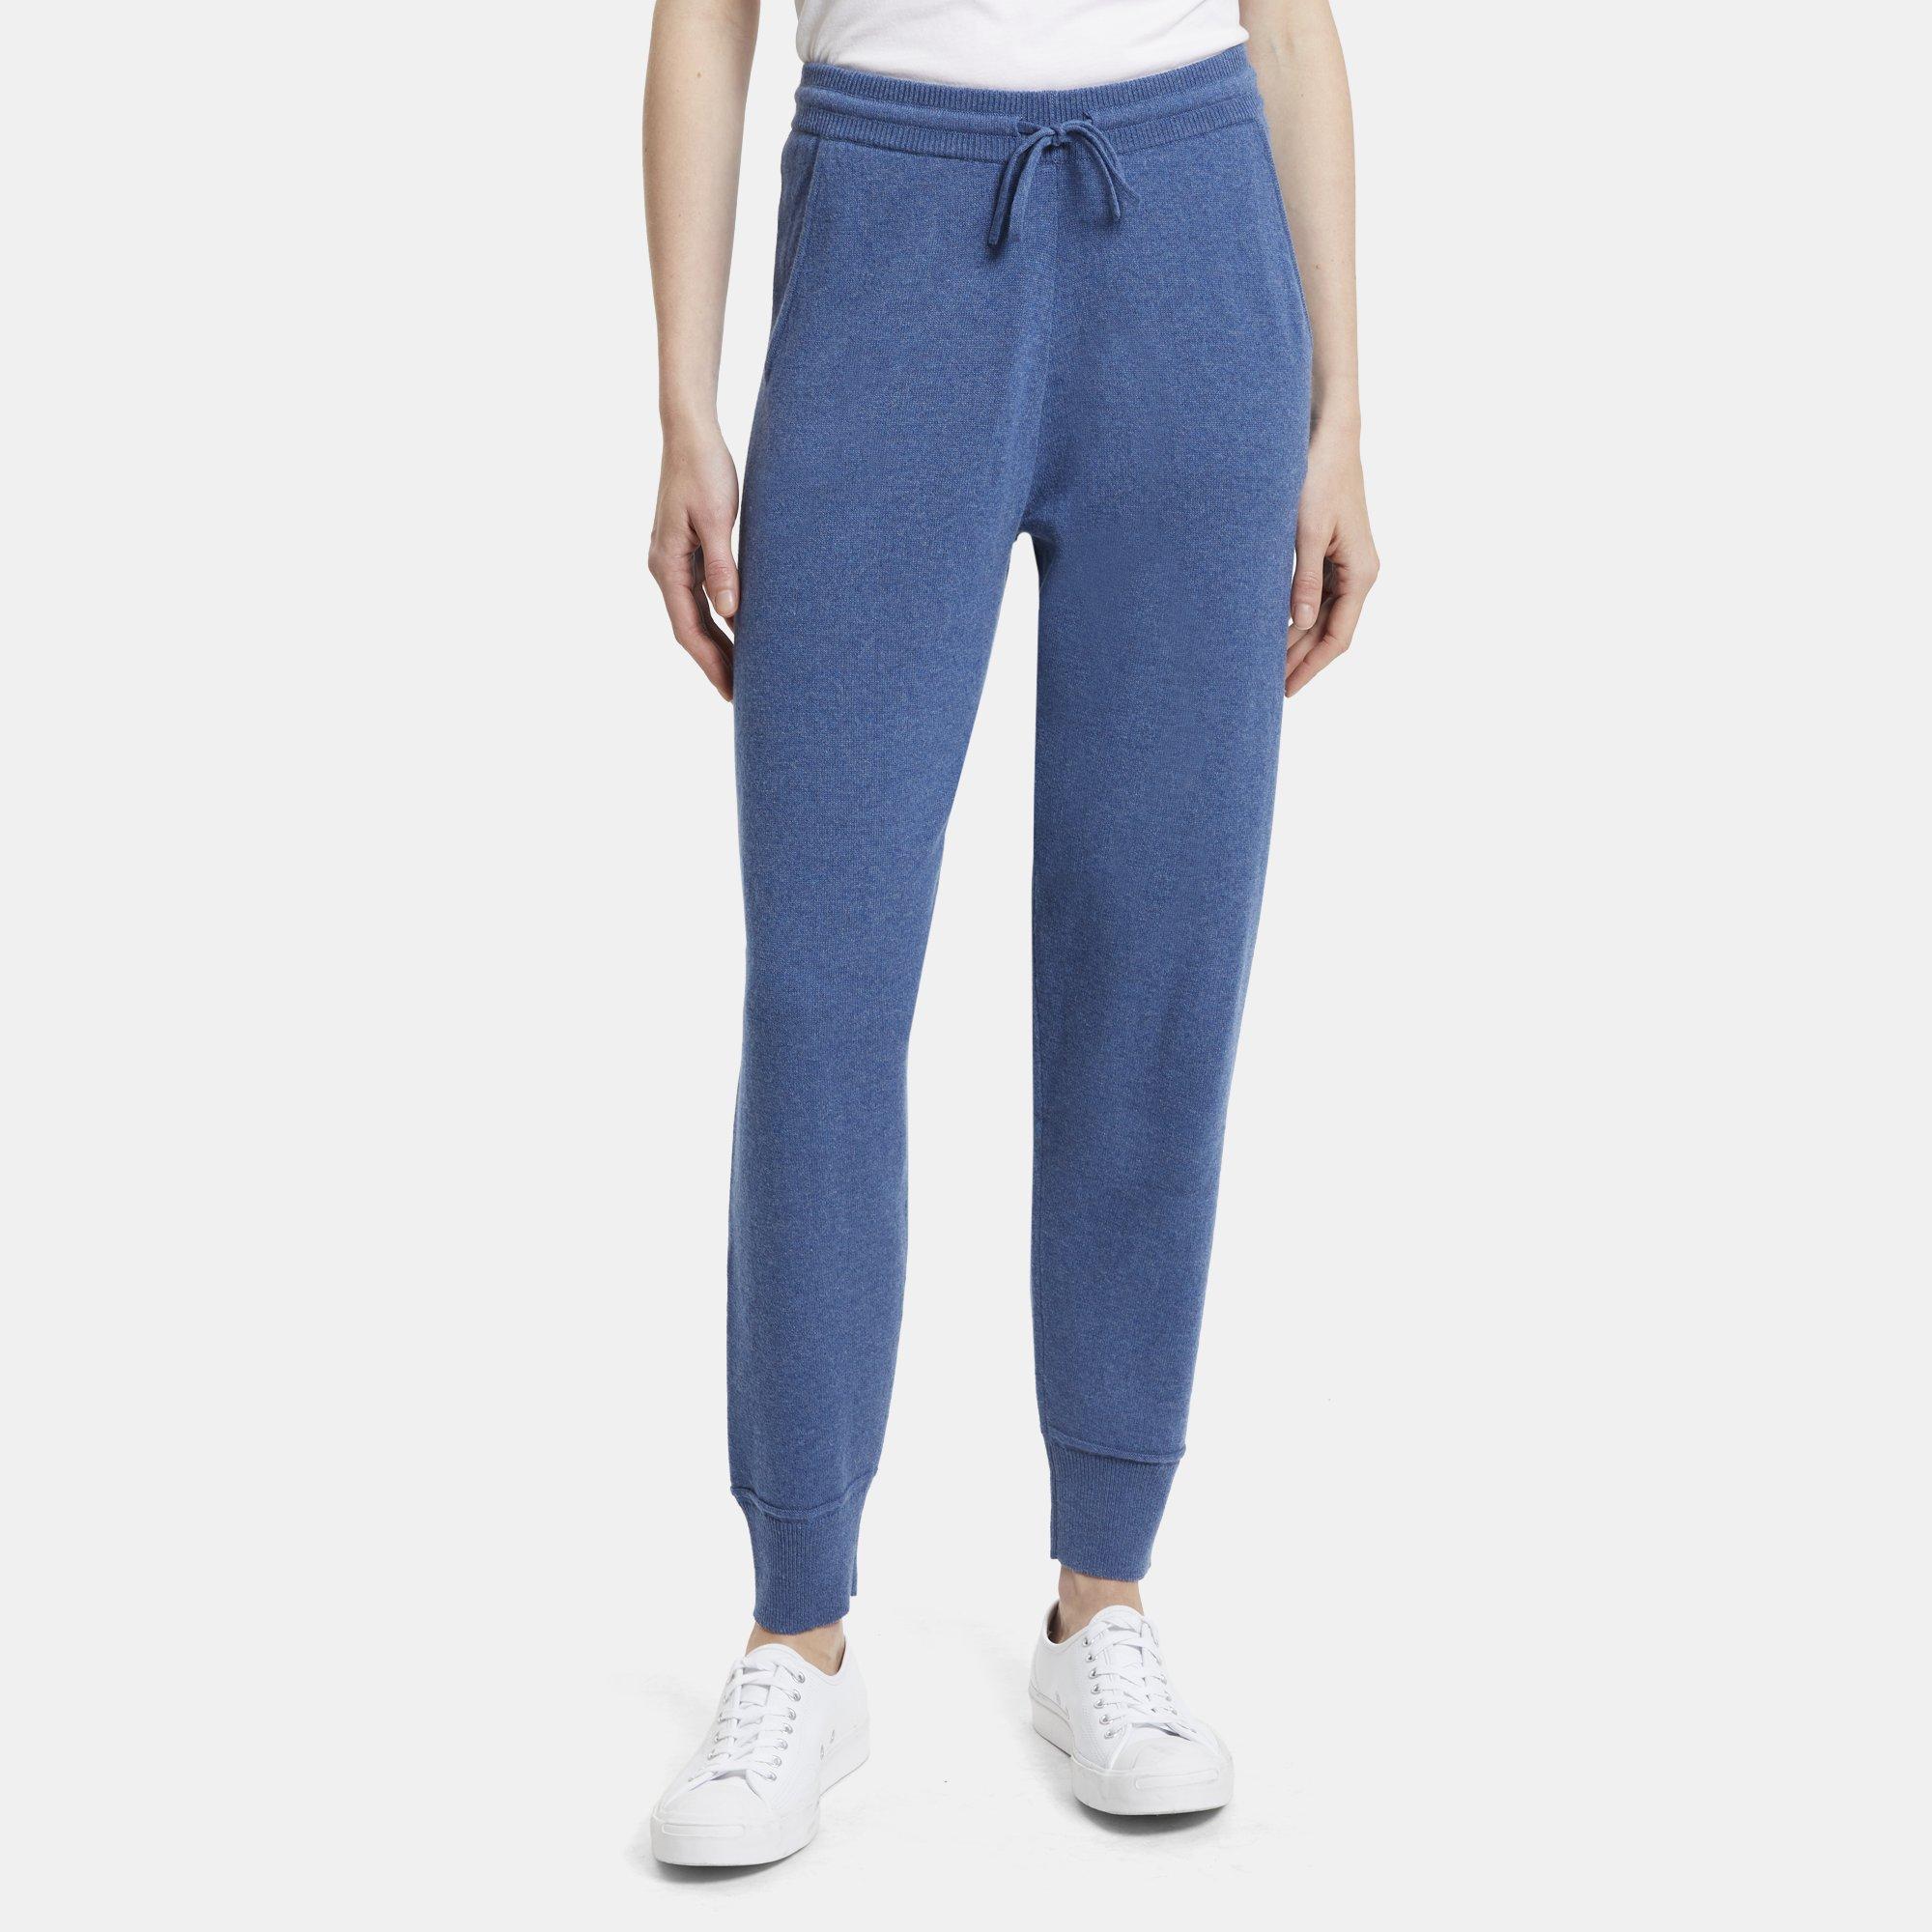 Theory Jogger Pant in Cashmere